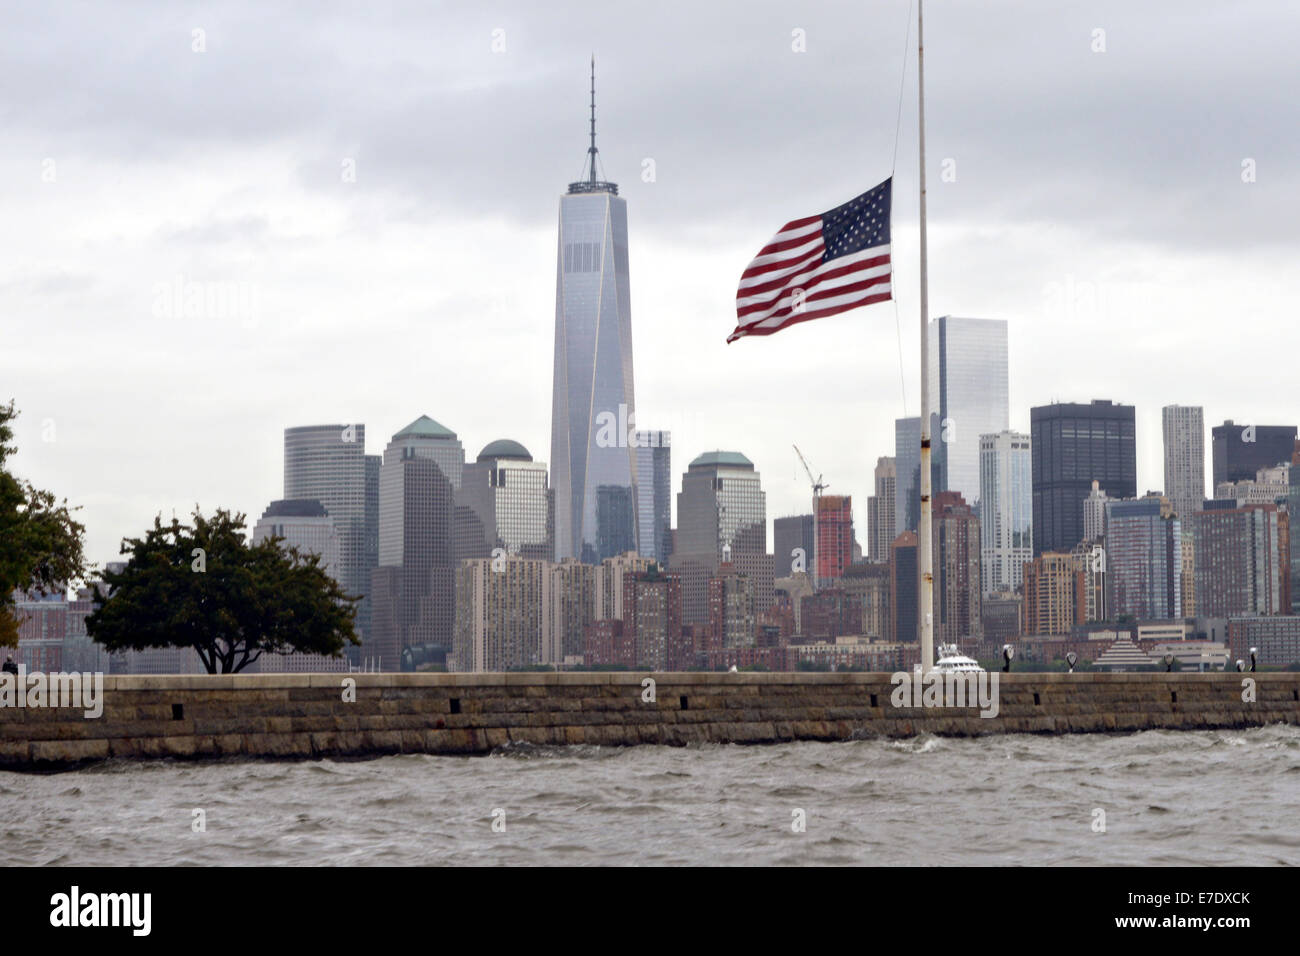 The American flag on Ellis Island at half-staff on a cloudy day with the Freedom Tower and skyline of Manhattan during the 13th anniversary of the 9/11 terrorist attacks September 11, 2014. Stock Photo